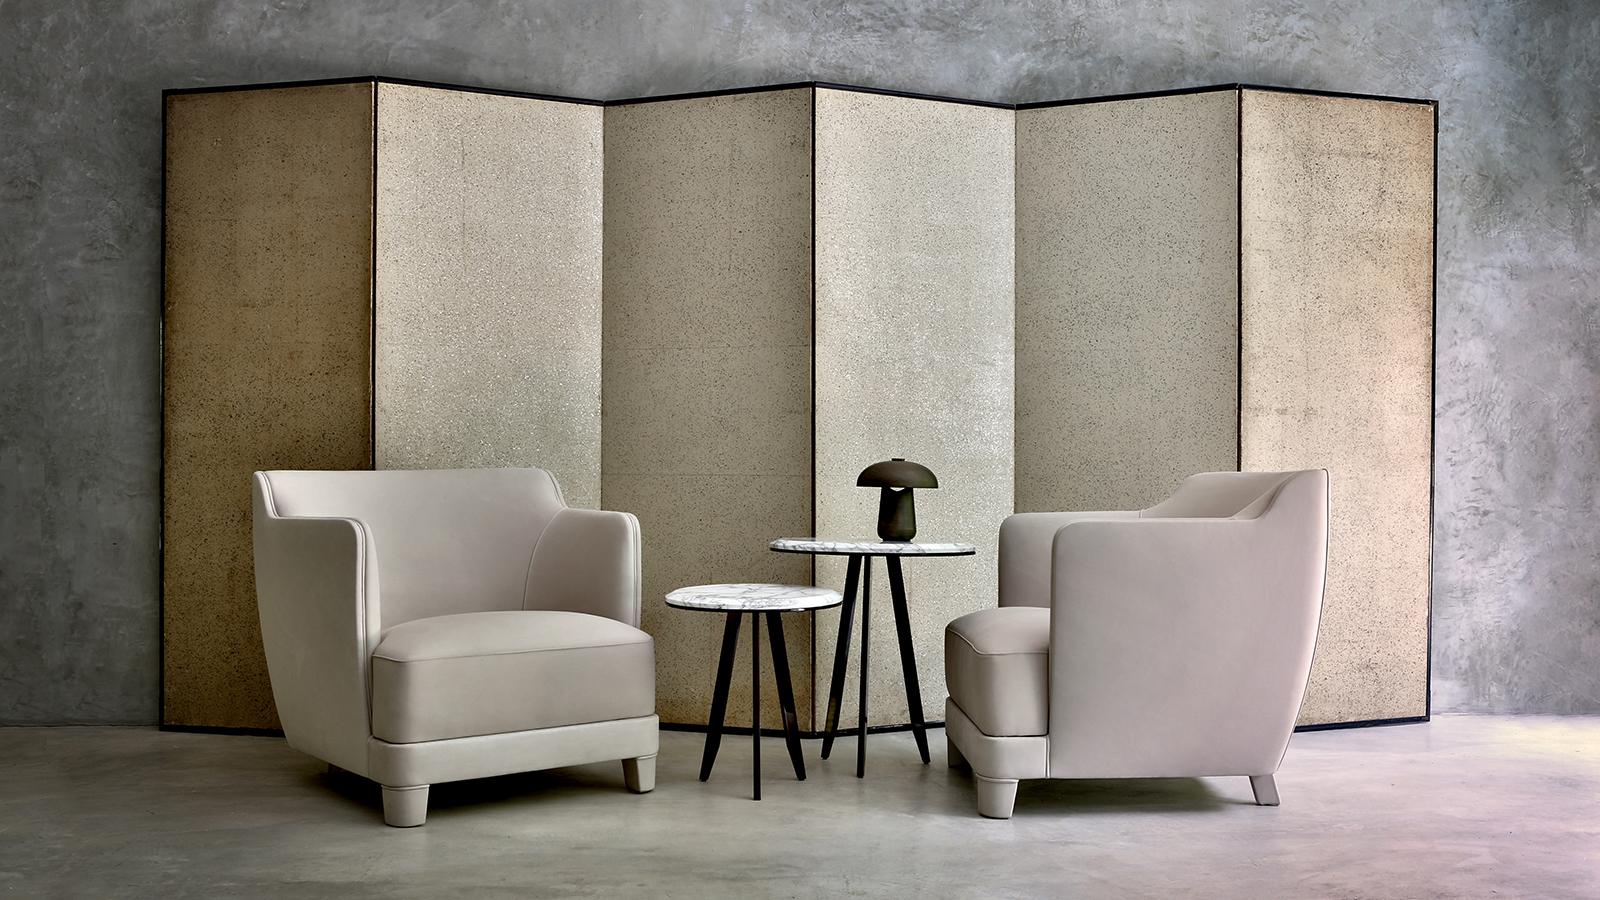 A small armchair with a decidedly formal character, softened by the embrace of the back and the sinuous line of the piping, which, upon request, can be done in a contrasting leather. Like the other chairs in the Lola family, every part of the Lola